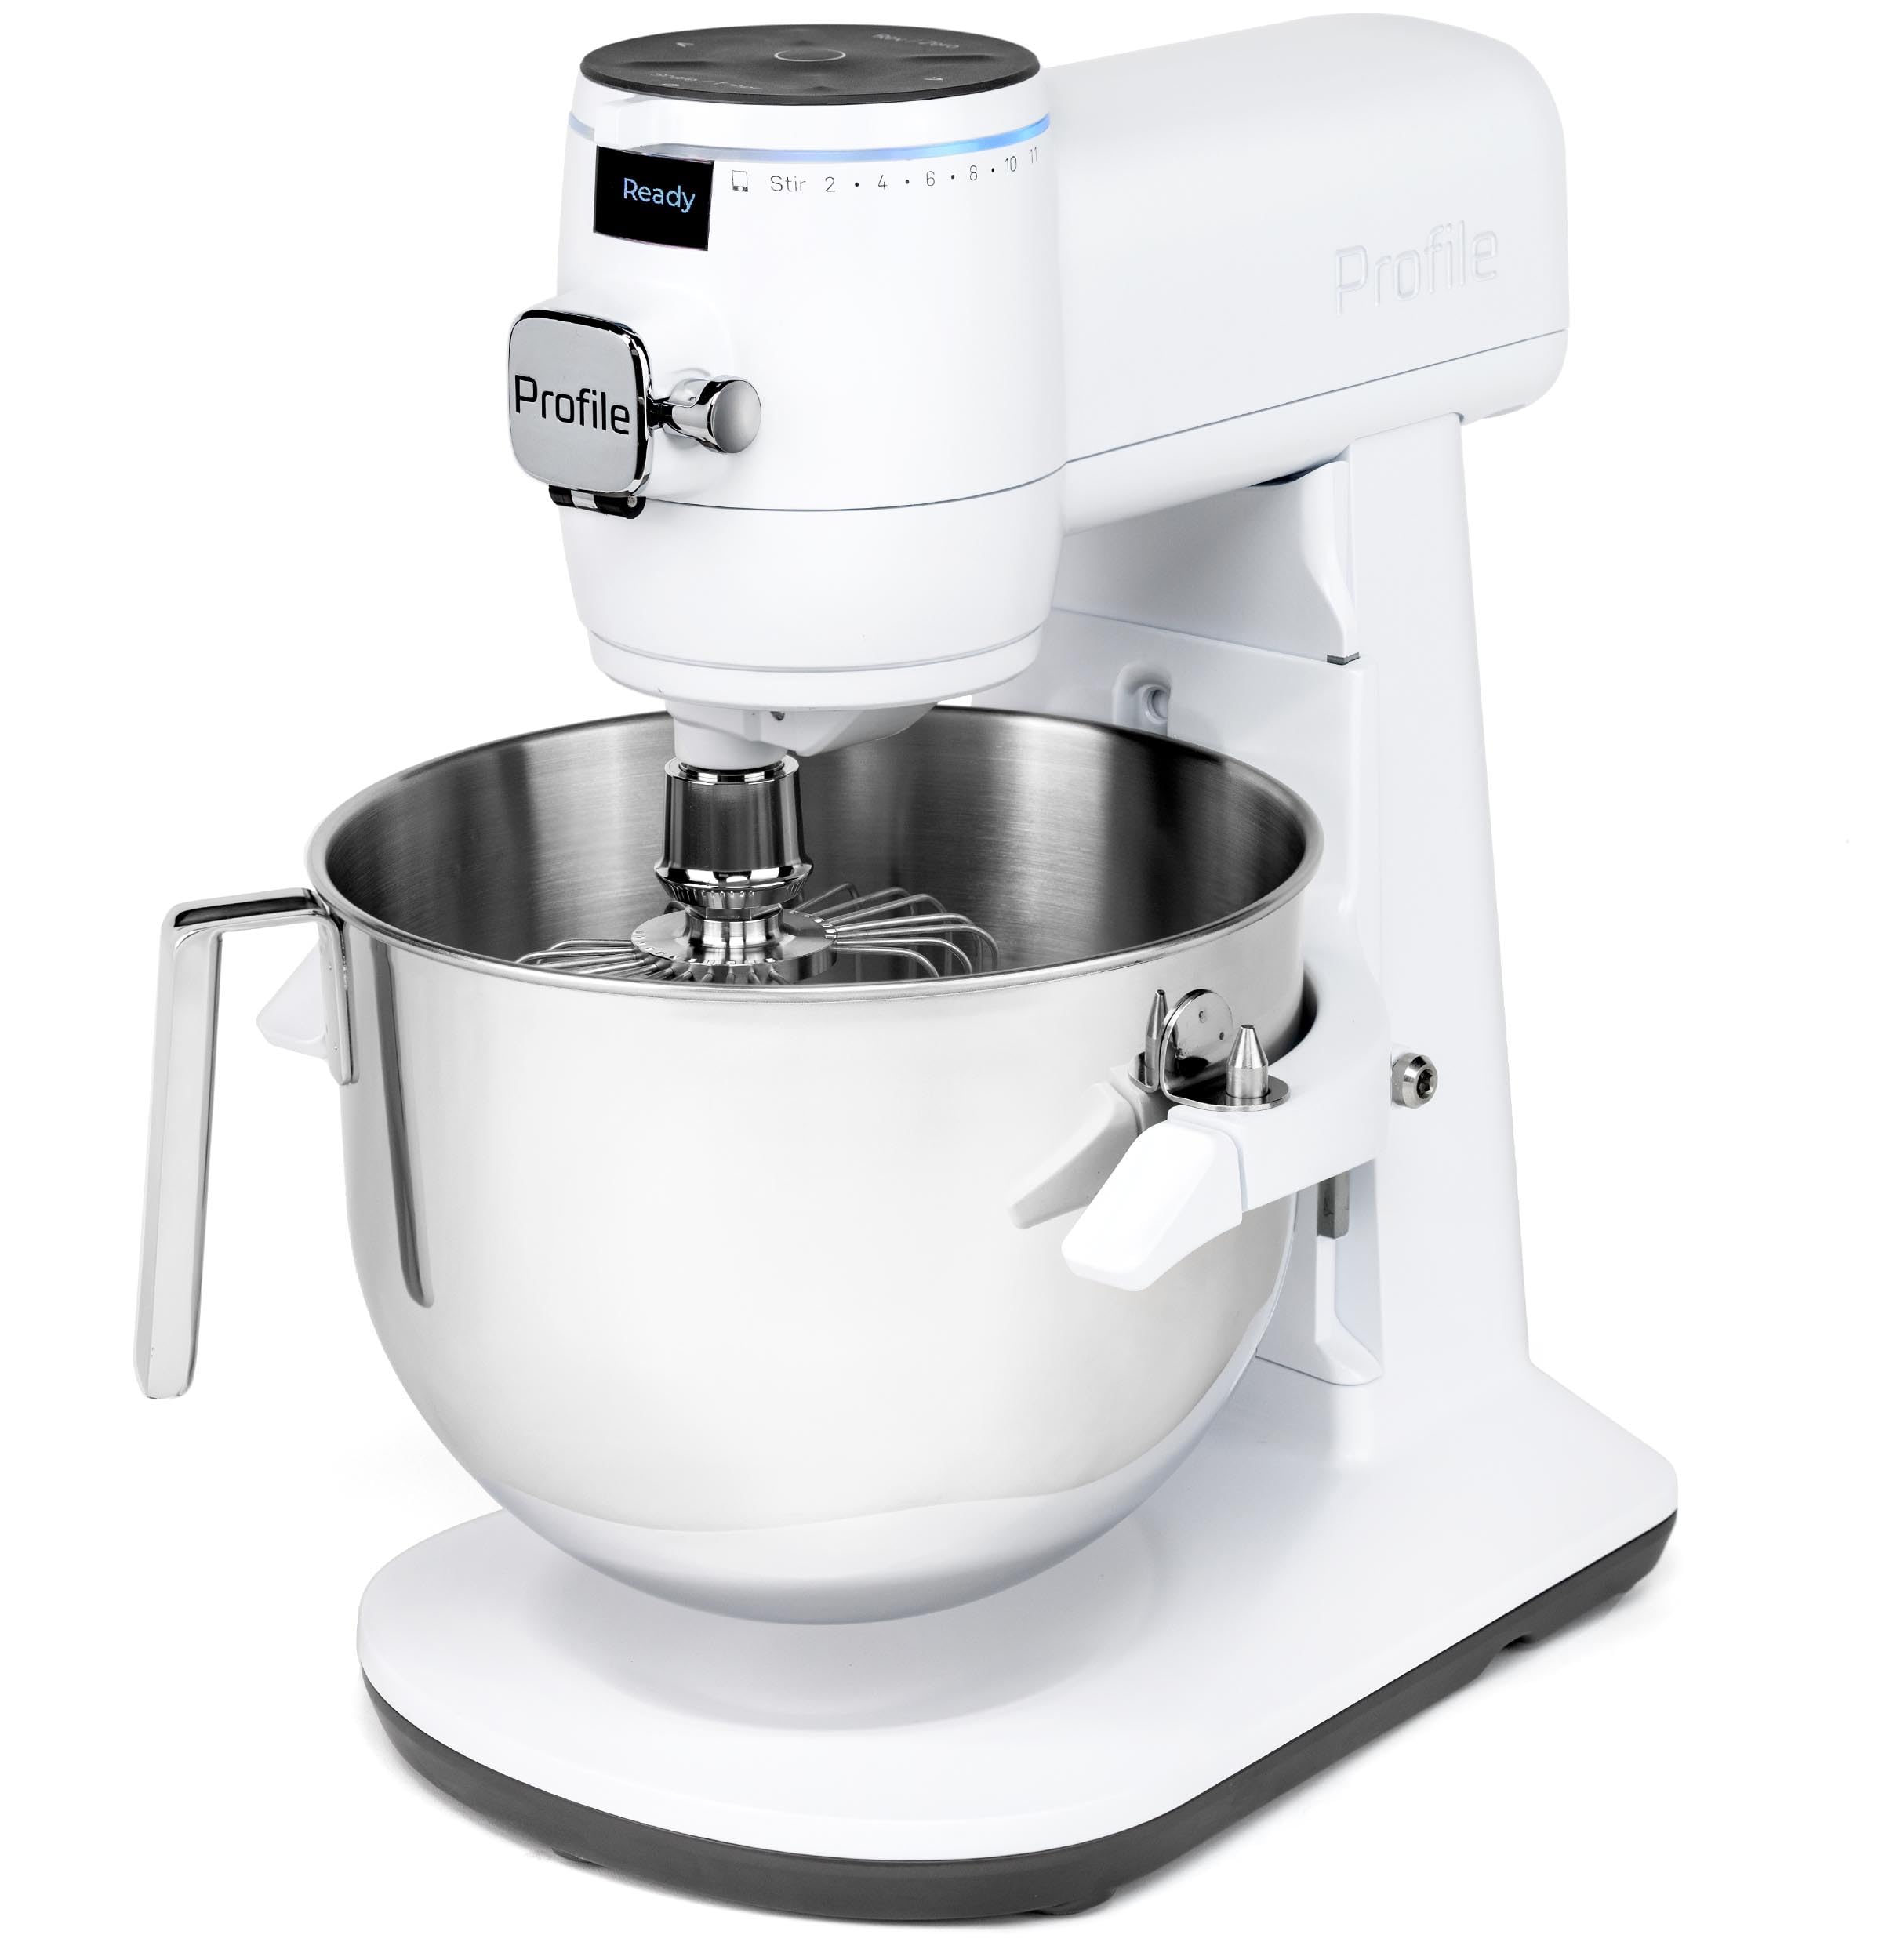 GE Profile Smart Stand Mixer w/Built-In Smart Scale & Auto Sense Technology, 7qt Stainless Steel Bowl, 11 Speed l Dough Hook, Beater, 11-wire whip l works w/Amazon Alexa & Google Home l Stone White